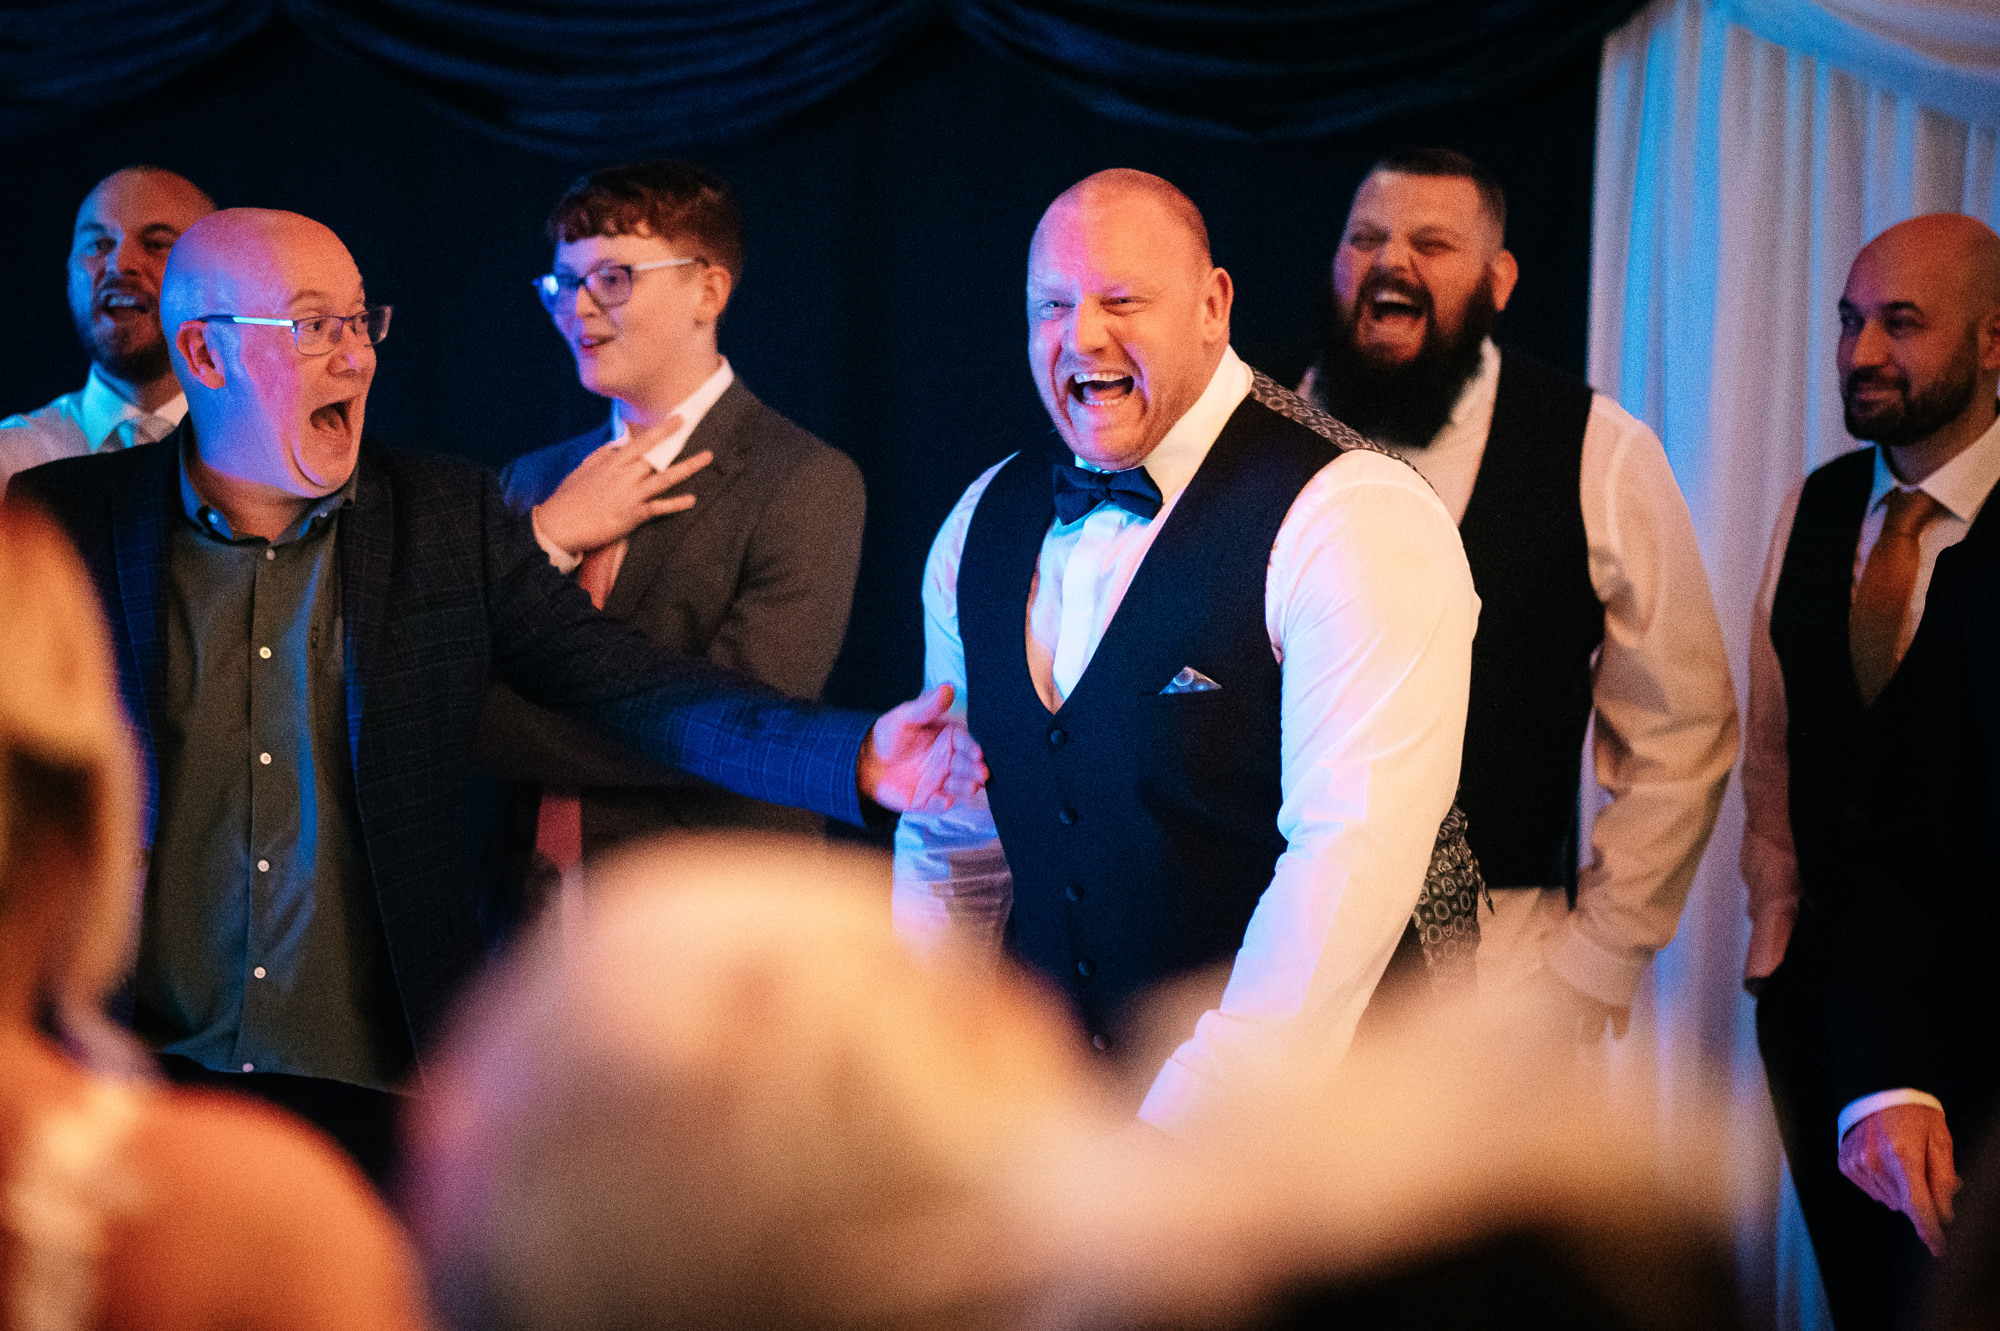 groom and the guys for a sing off